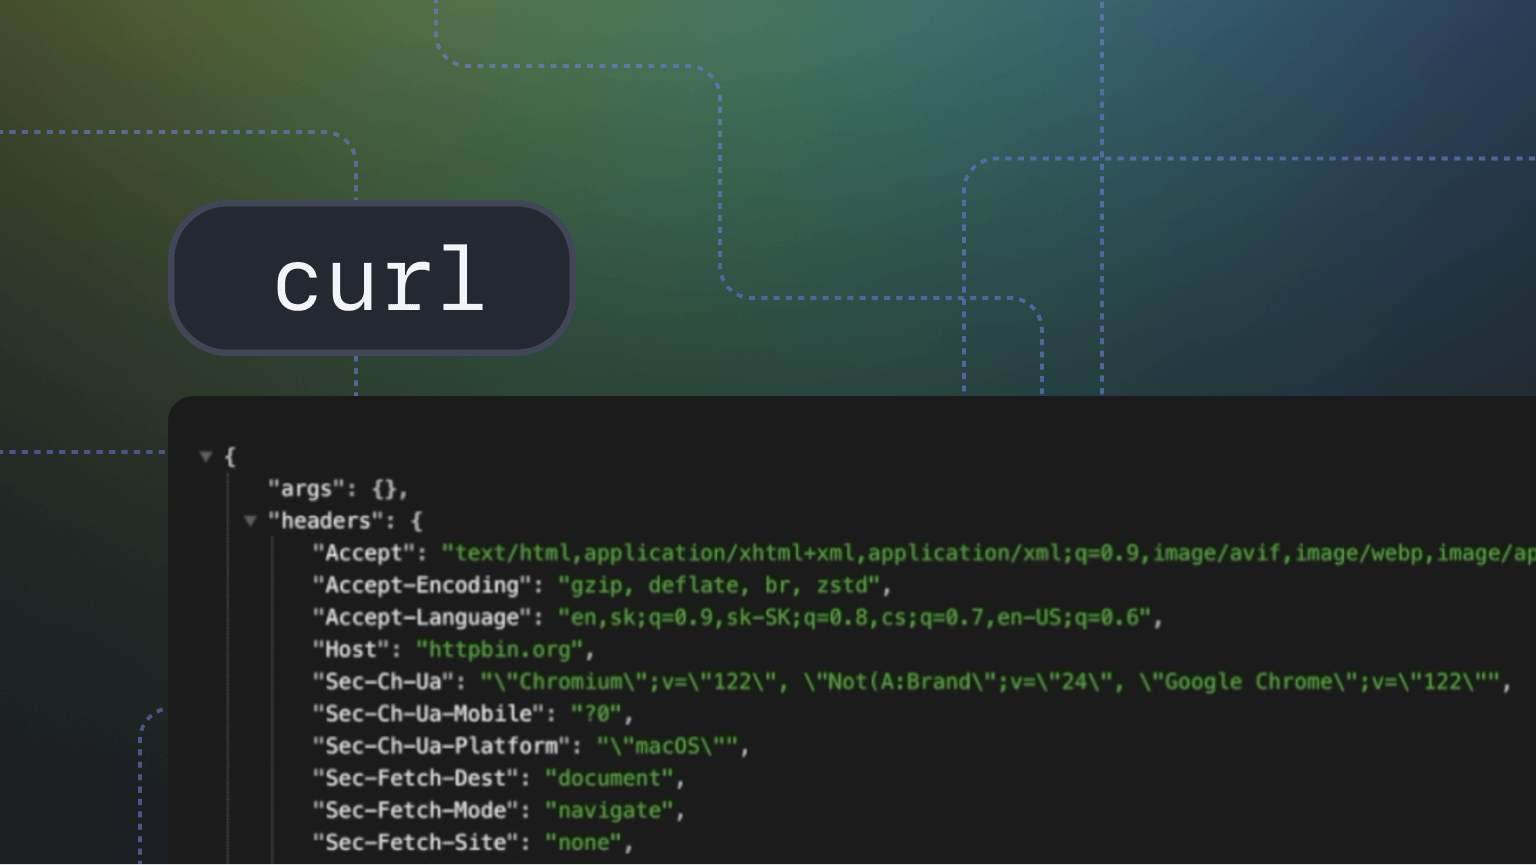 Send HTTP headers with cURL